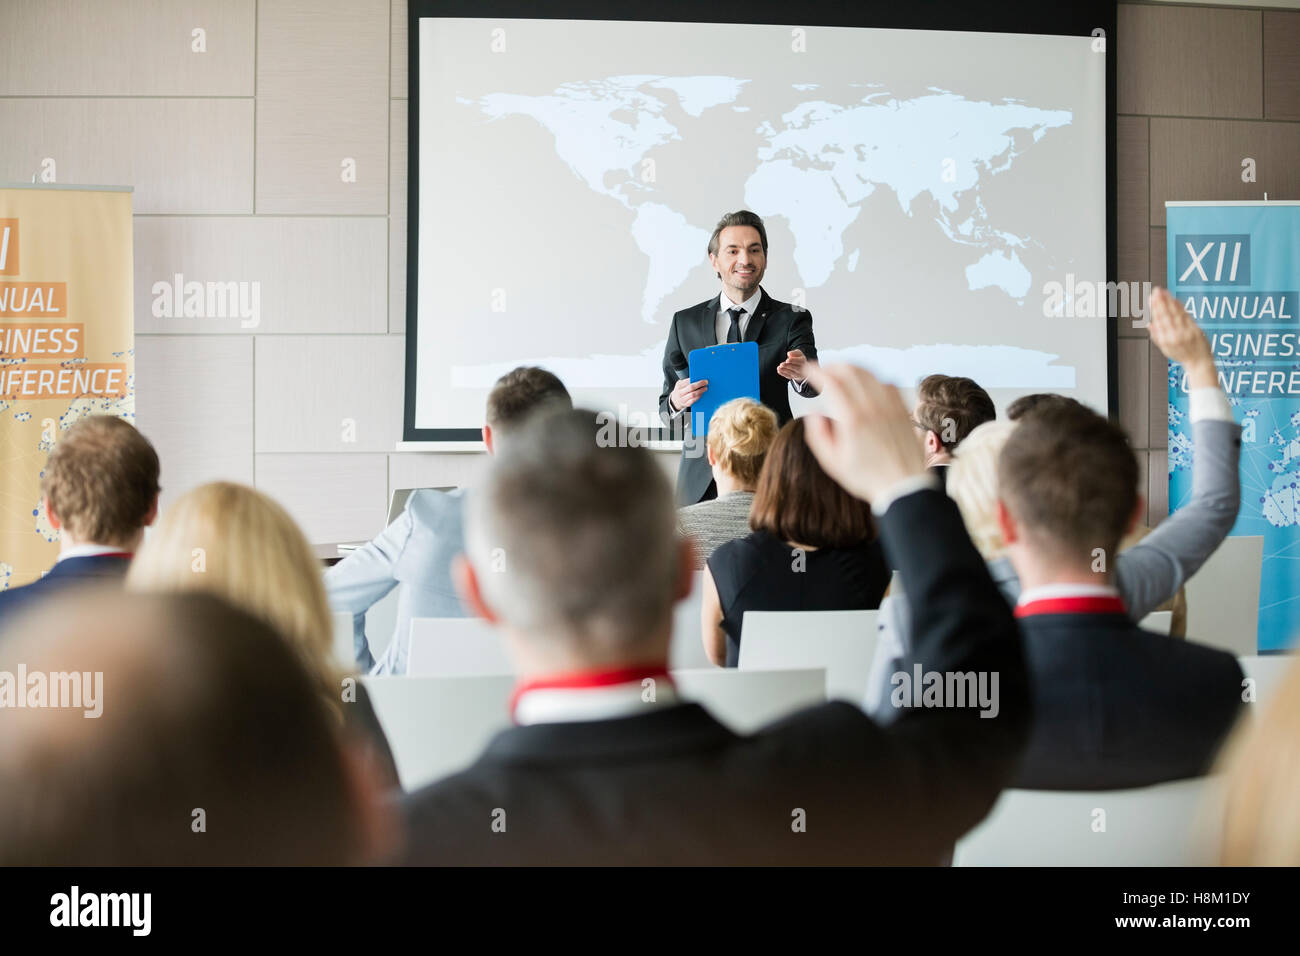 Smiling public speaker asking questions to audience during seminar Stock Photo